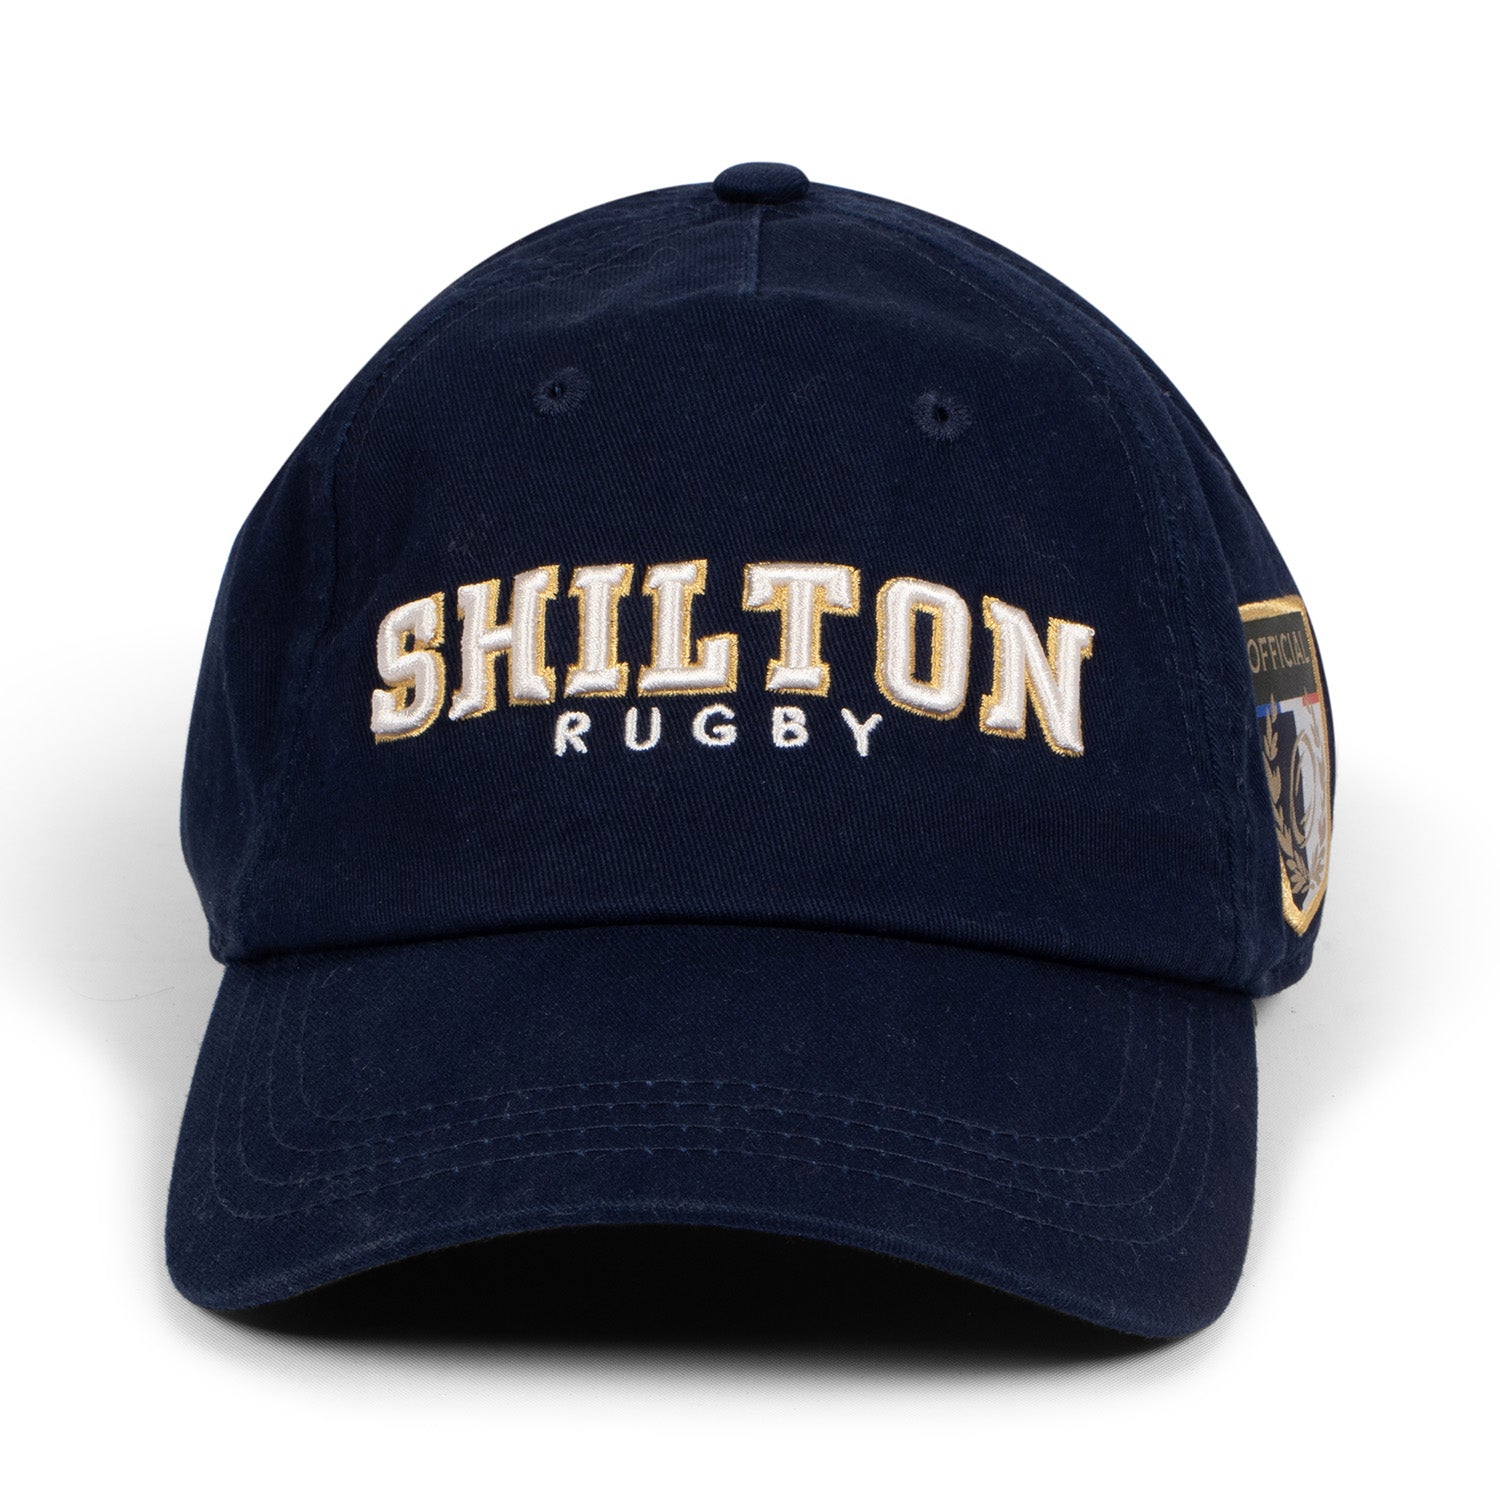 Casquette rugby nations